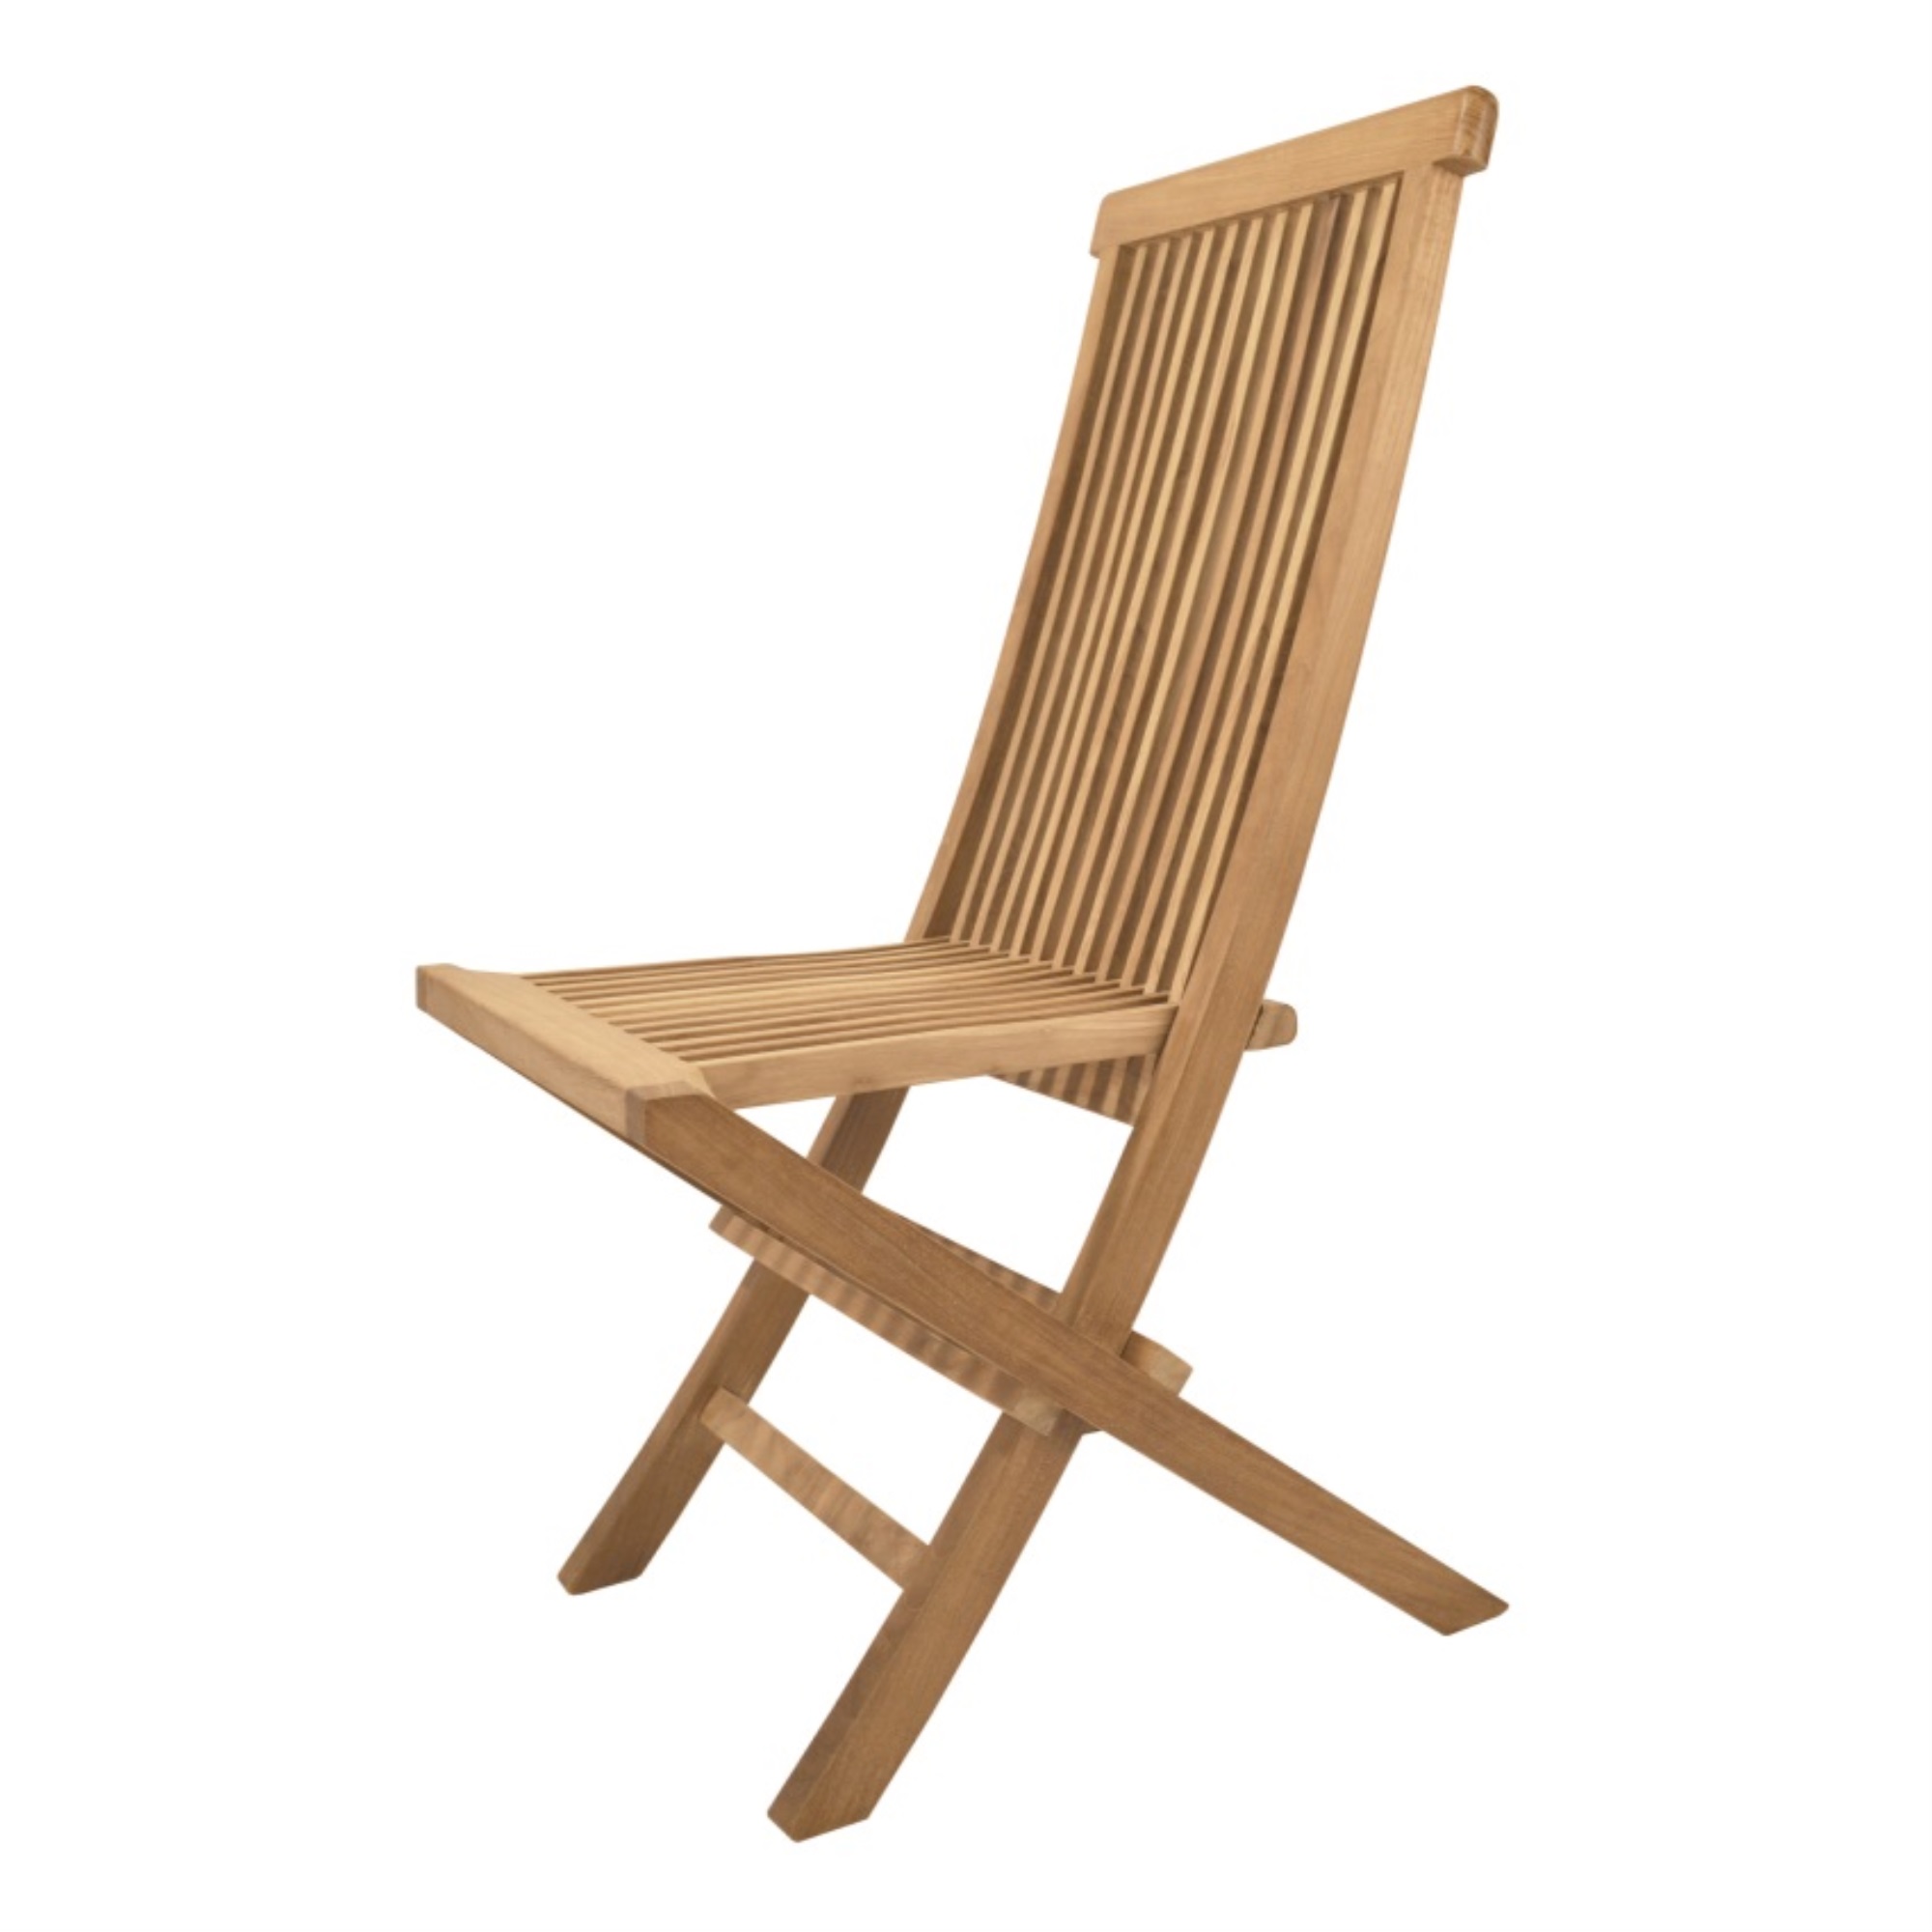 Anderson Teak Classic Folding Chair - image 3 of 5